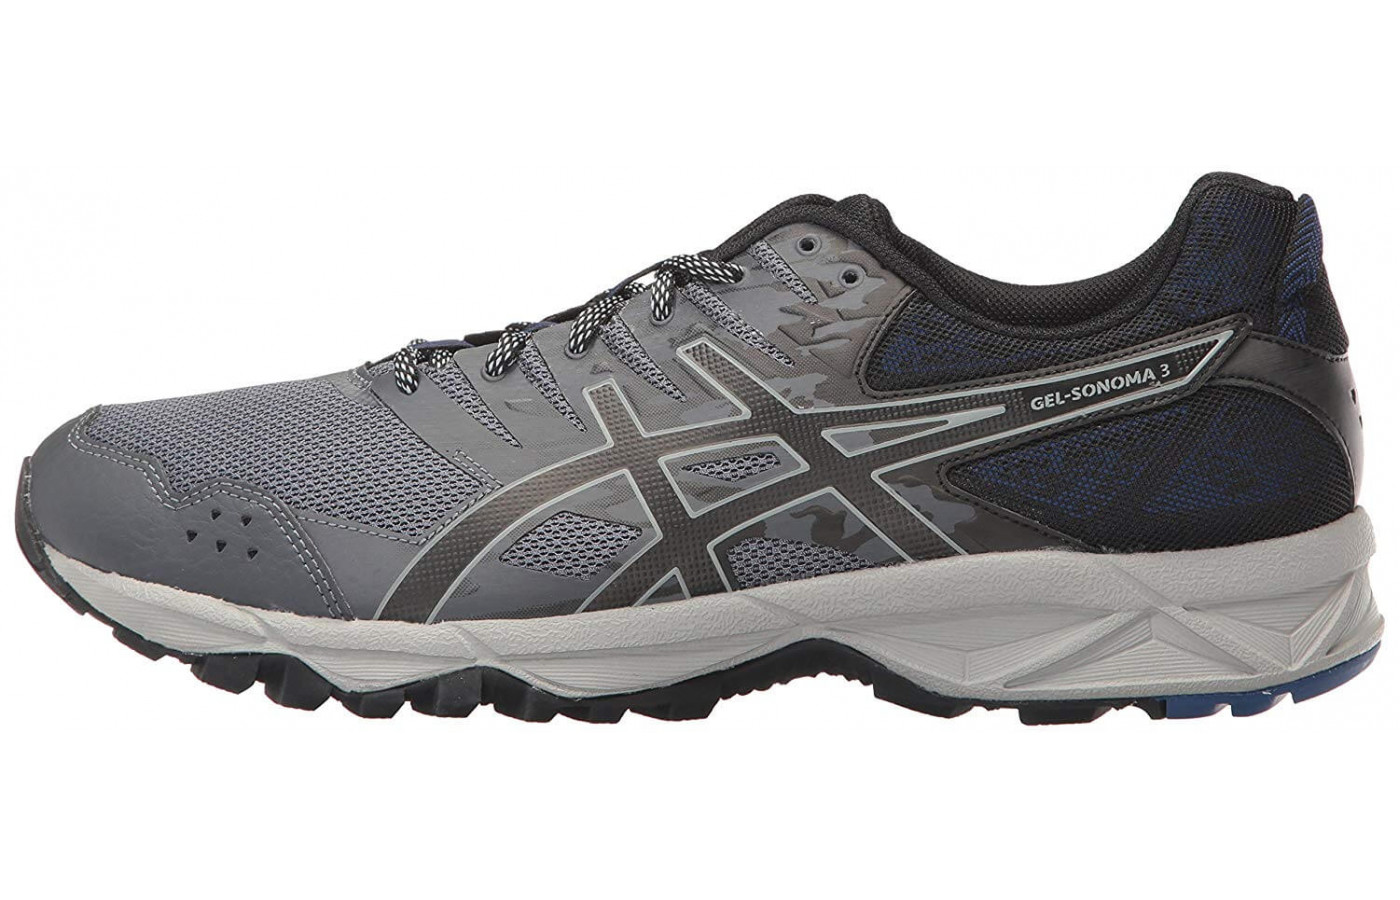 The ASICS GEL-Sonoma 3 side view